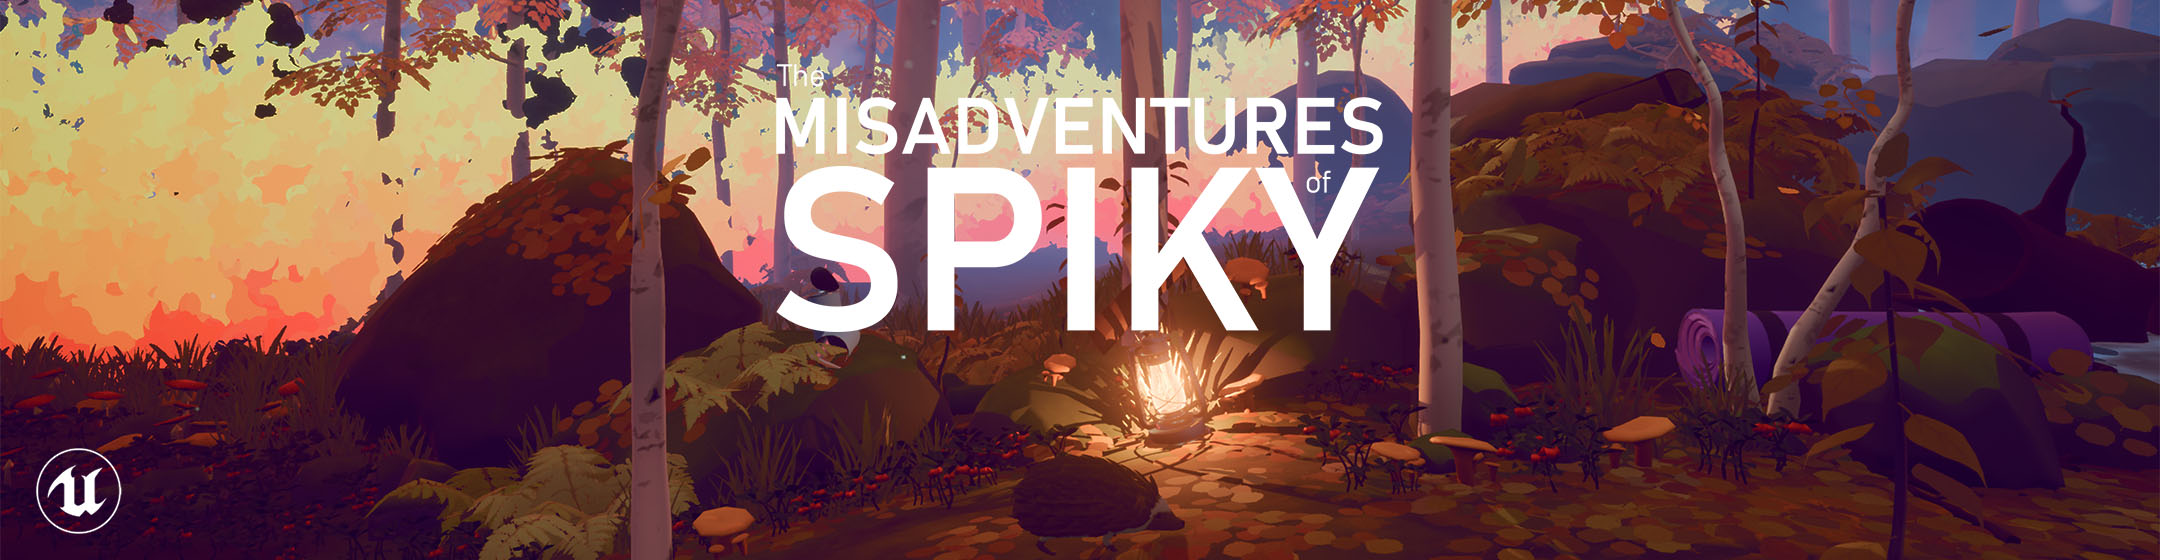 The Misadventures of Spiky.